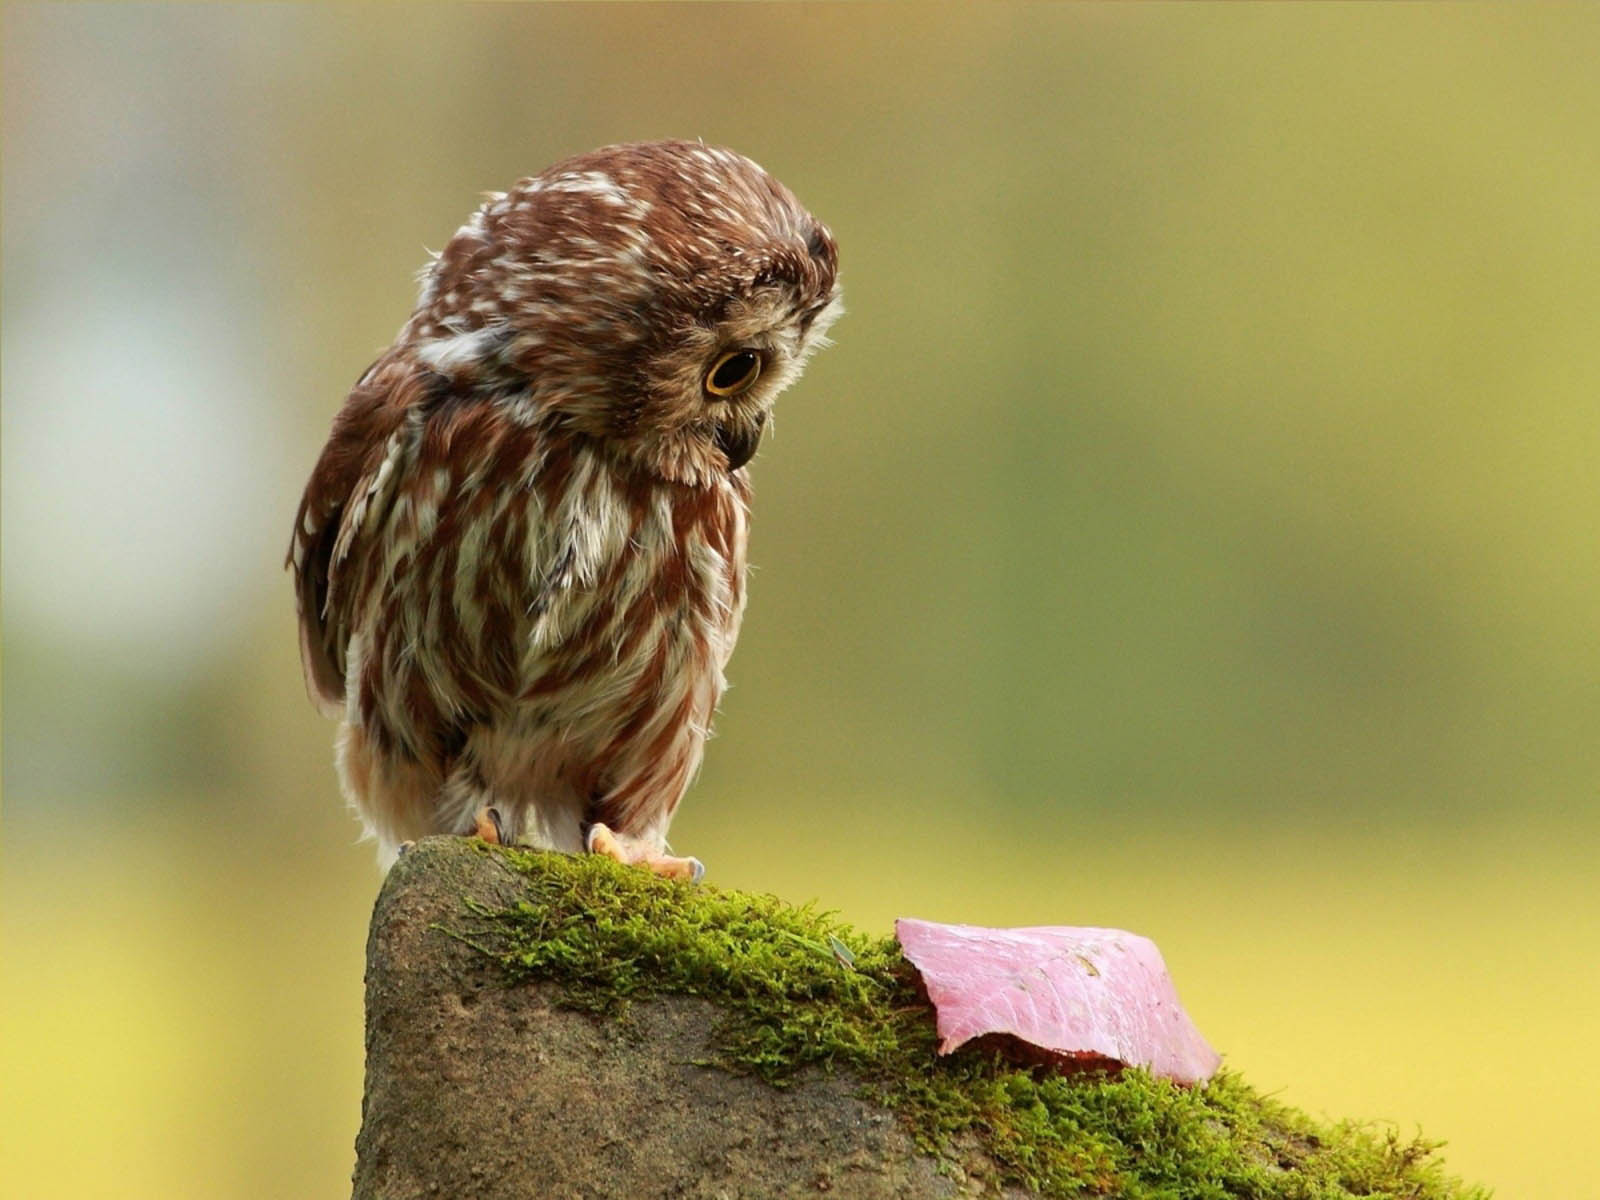 Funny Owl Wallpaper Image Paos Pictures And Background For